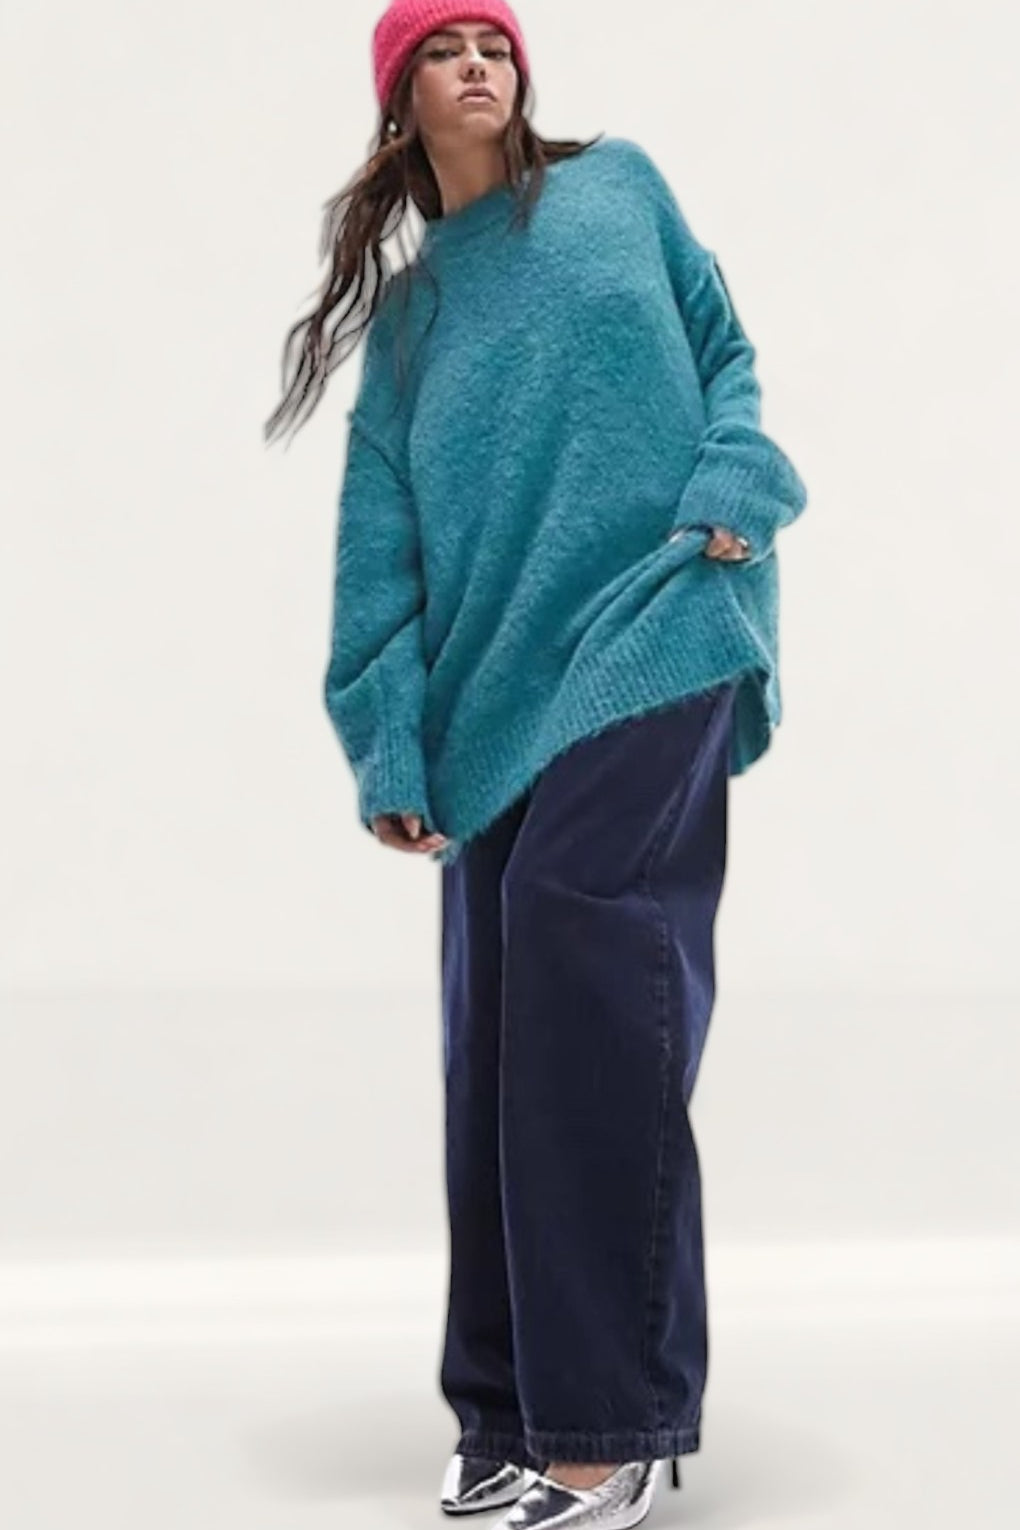 Topshop Knitted Longline Exposed Seam Fluffy Crew Neck Jumper in Teal product image